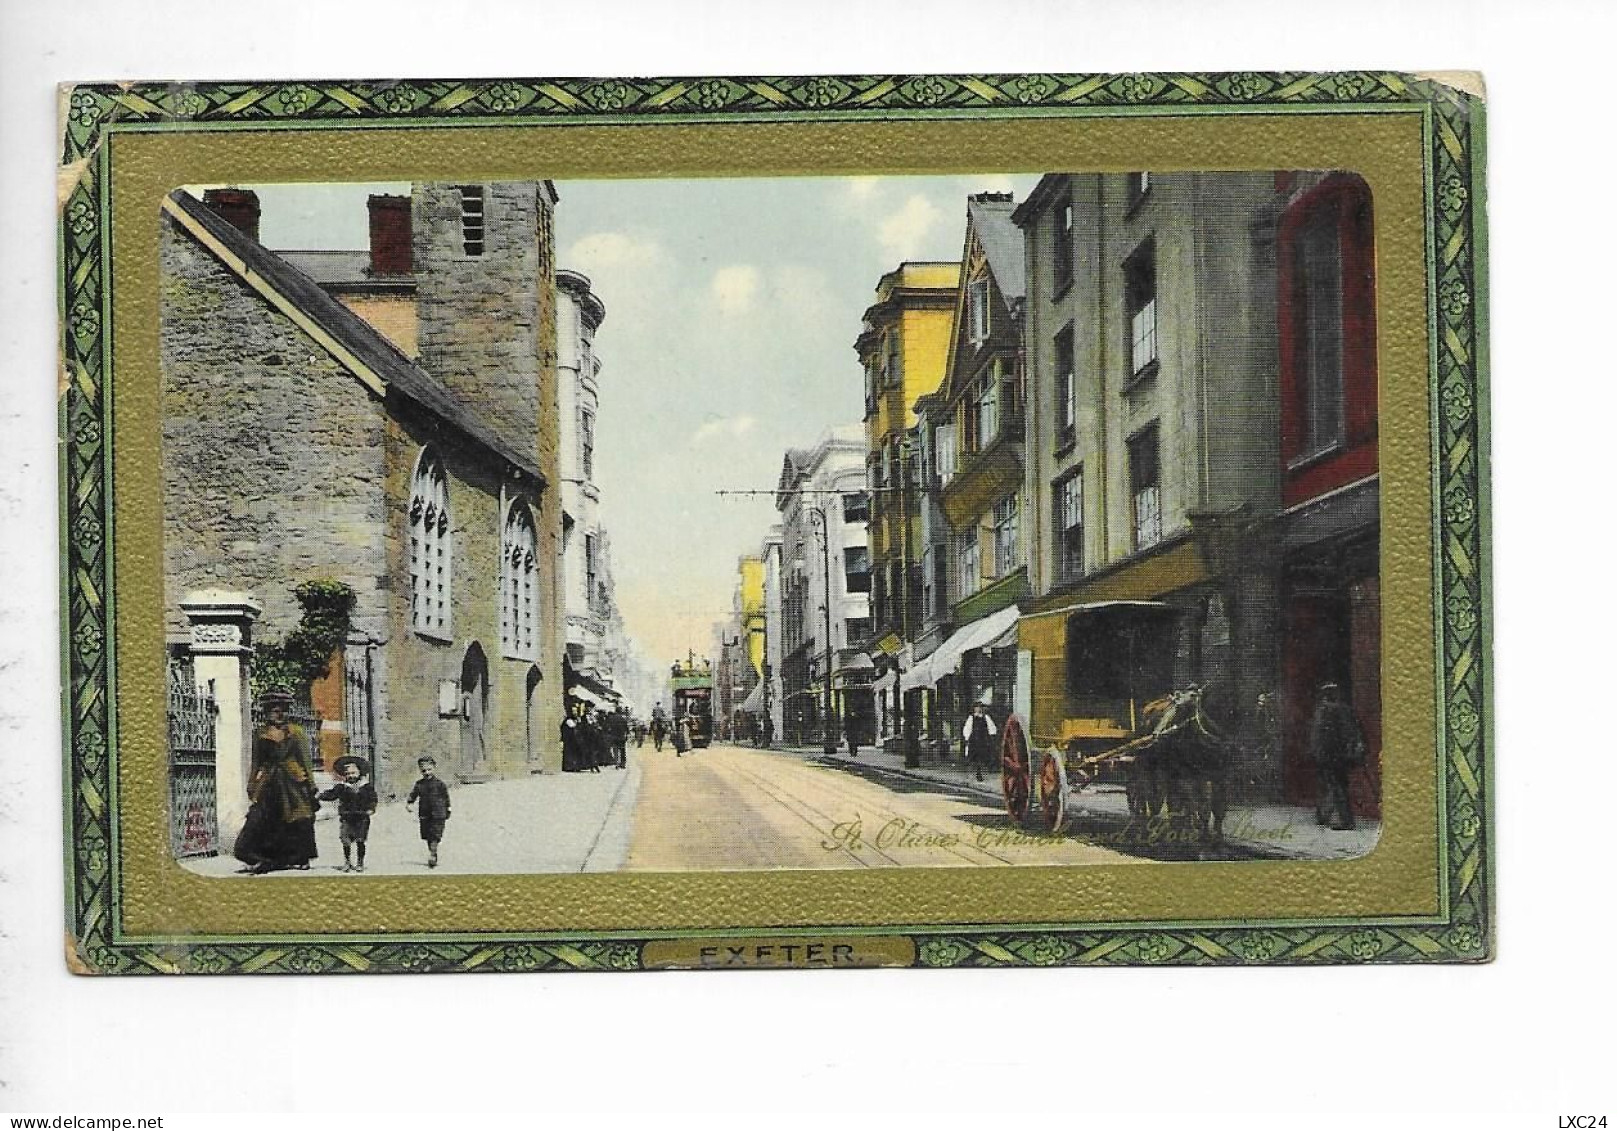 EXETER. ST. OLAVES CHURCH AND FORE STREET. - Exeter